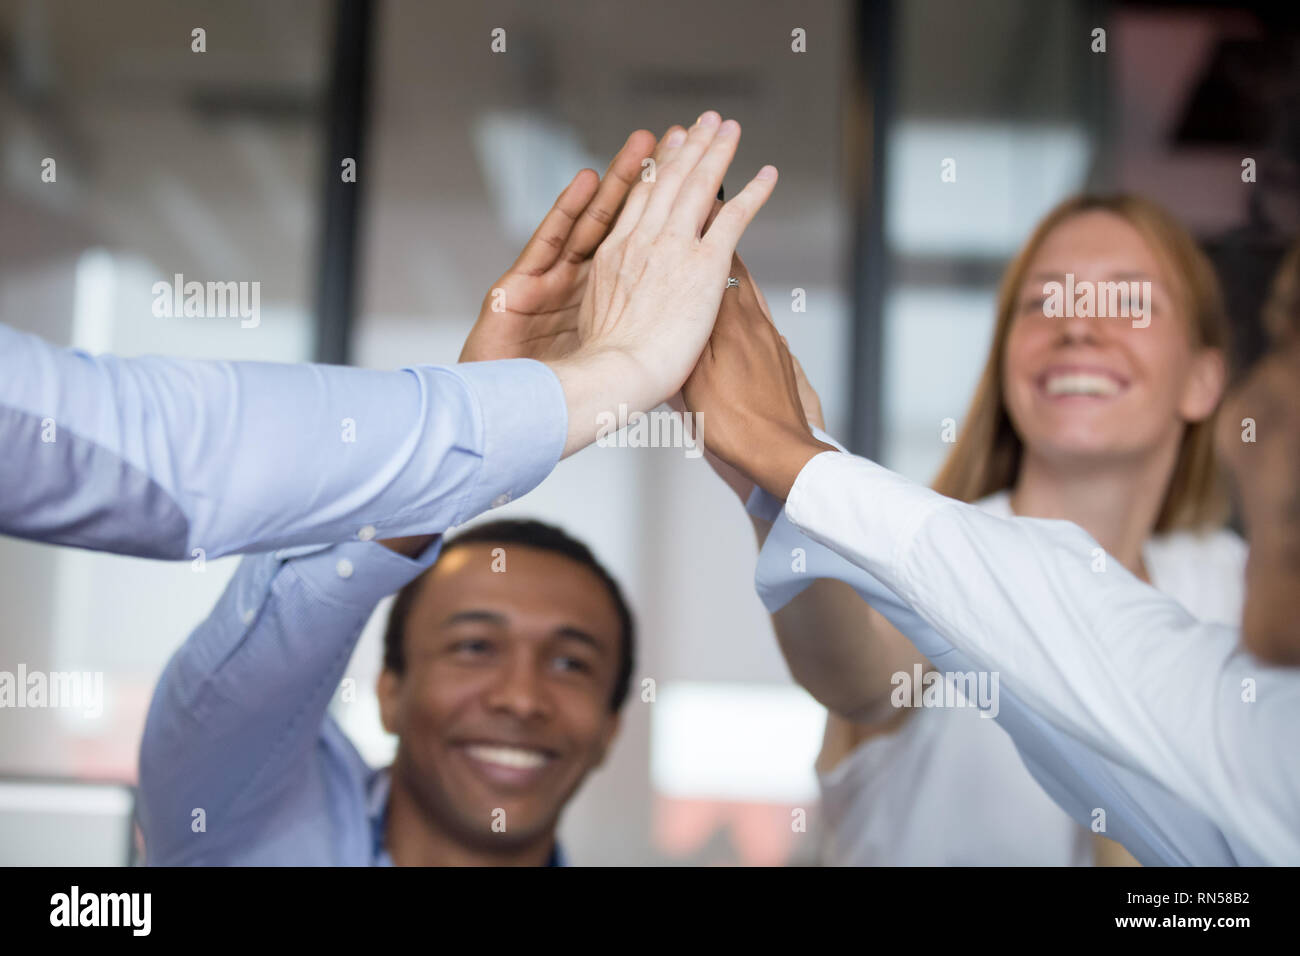 Happy diverse businesspeople giving high five closeup focus on hands Stock Photo